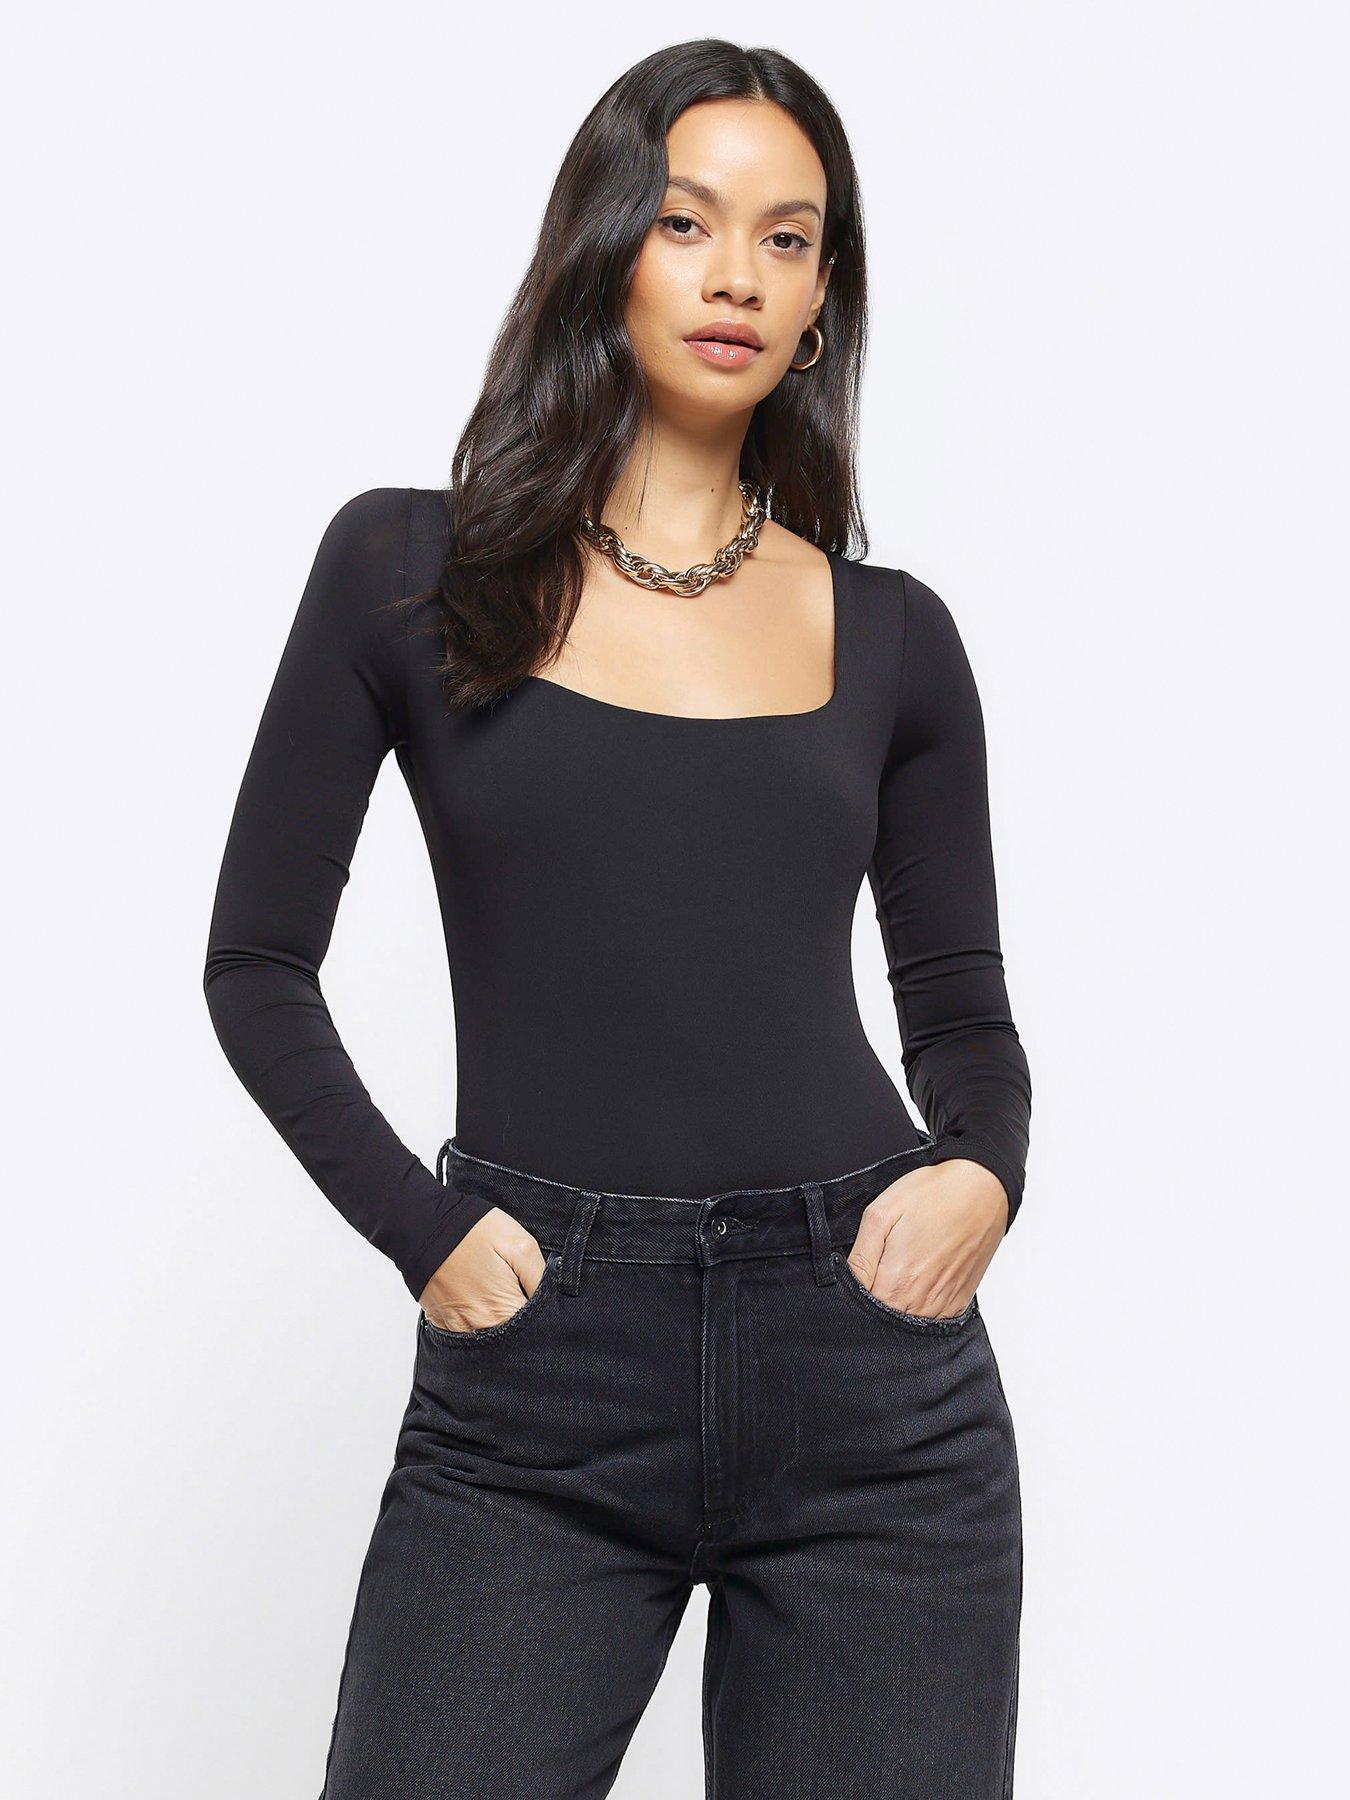 Black Going Out Tops for Women, Black Evening Tops